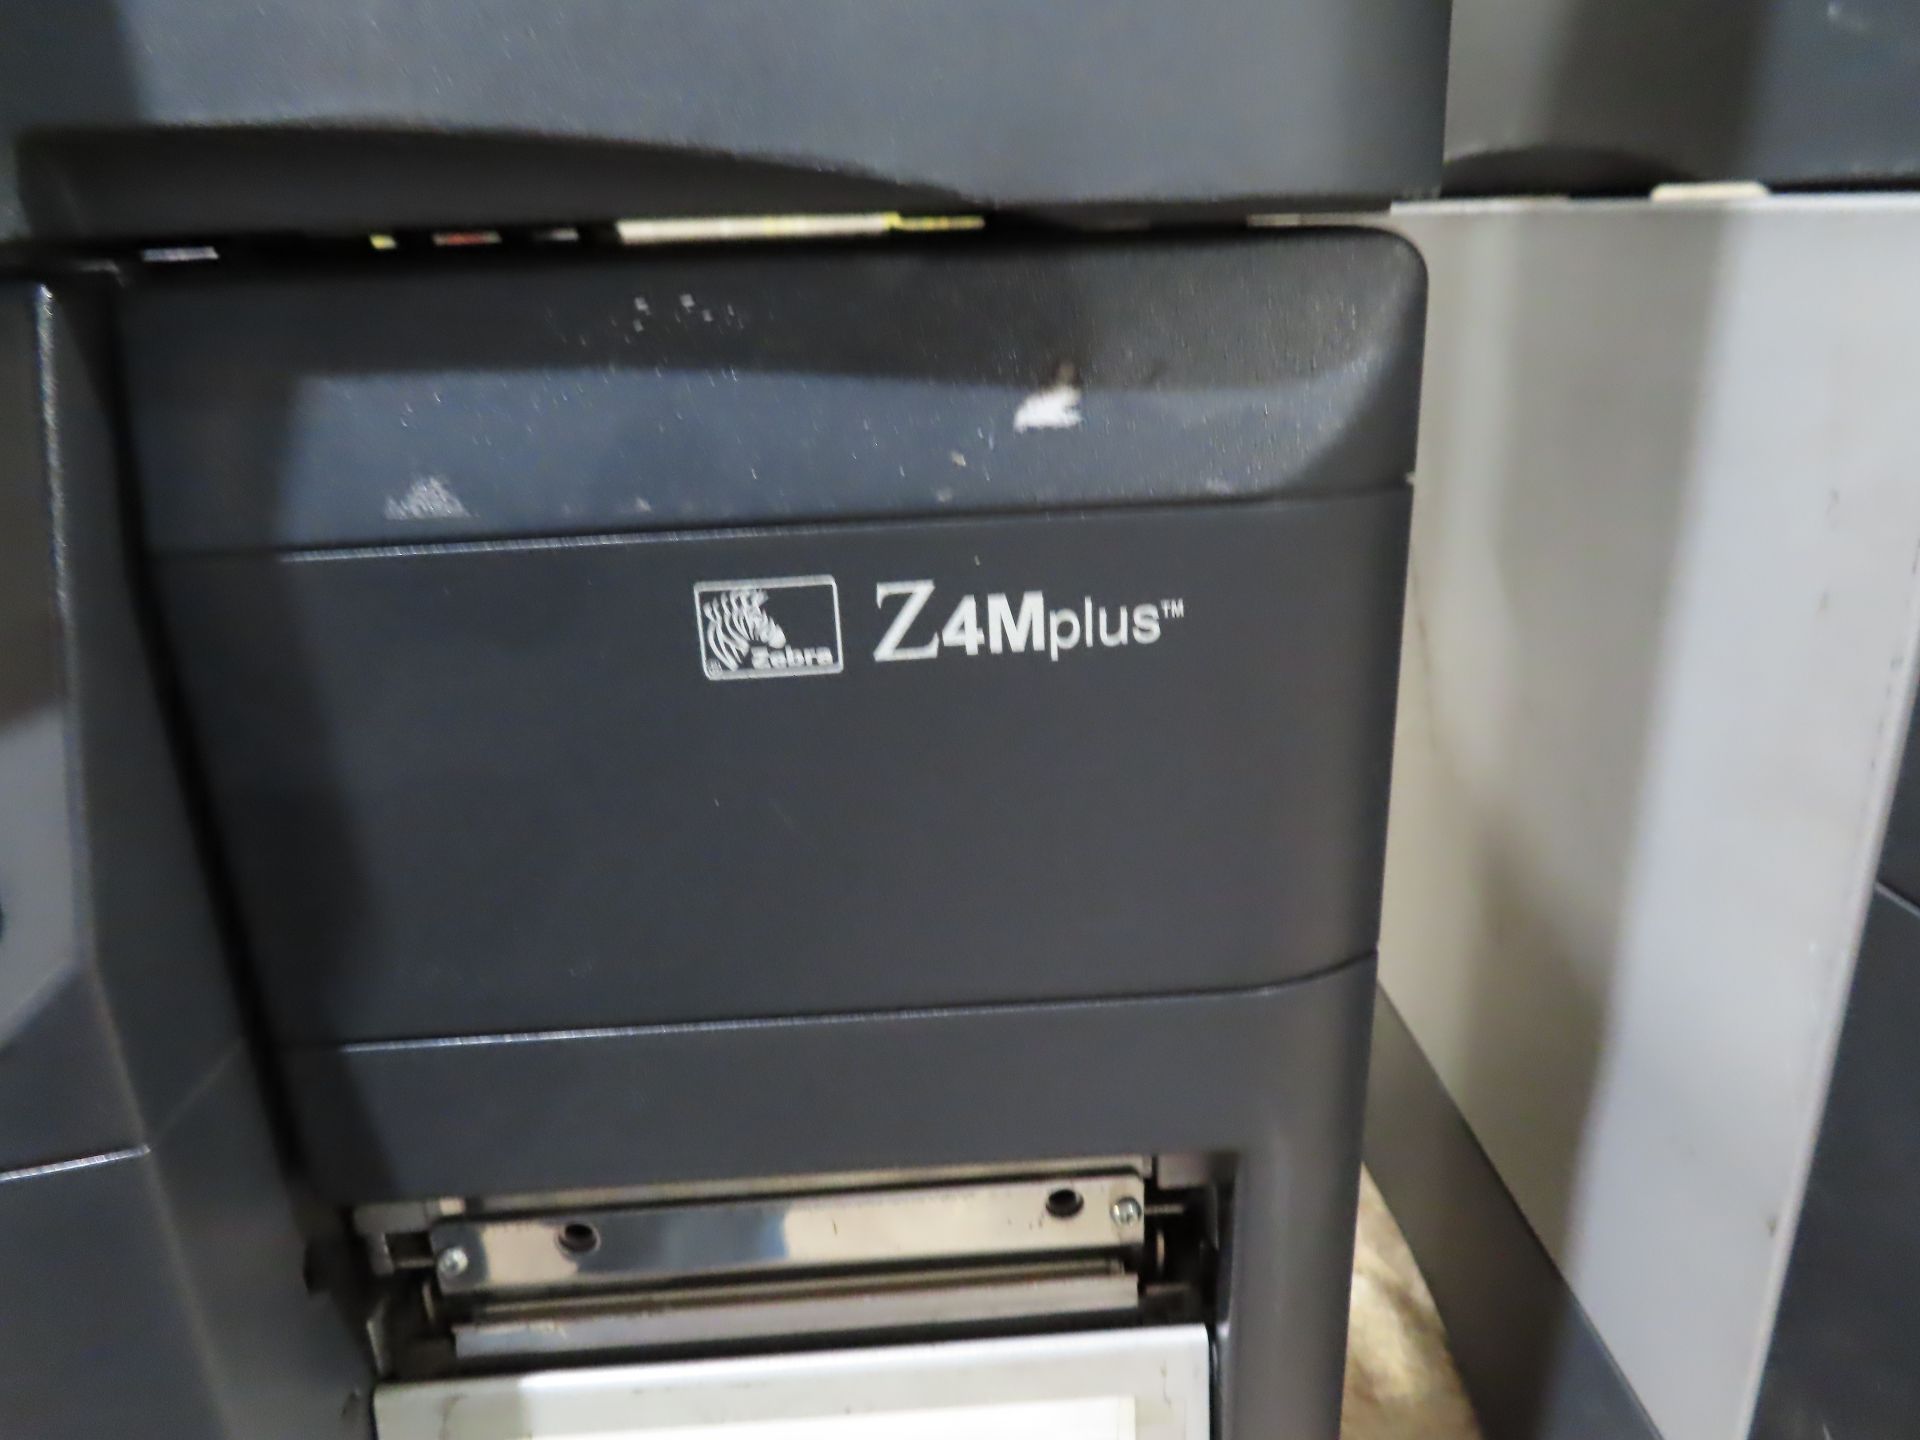 Qty 2 Zebra industrial printers, Z4M, and Z4Mplus, as always, with Brolyn LLC auctions, all lots can - Image 3 of 3